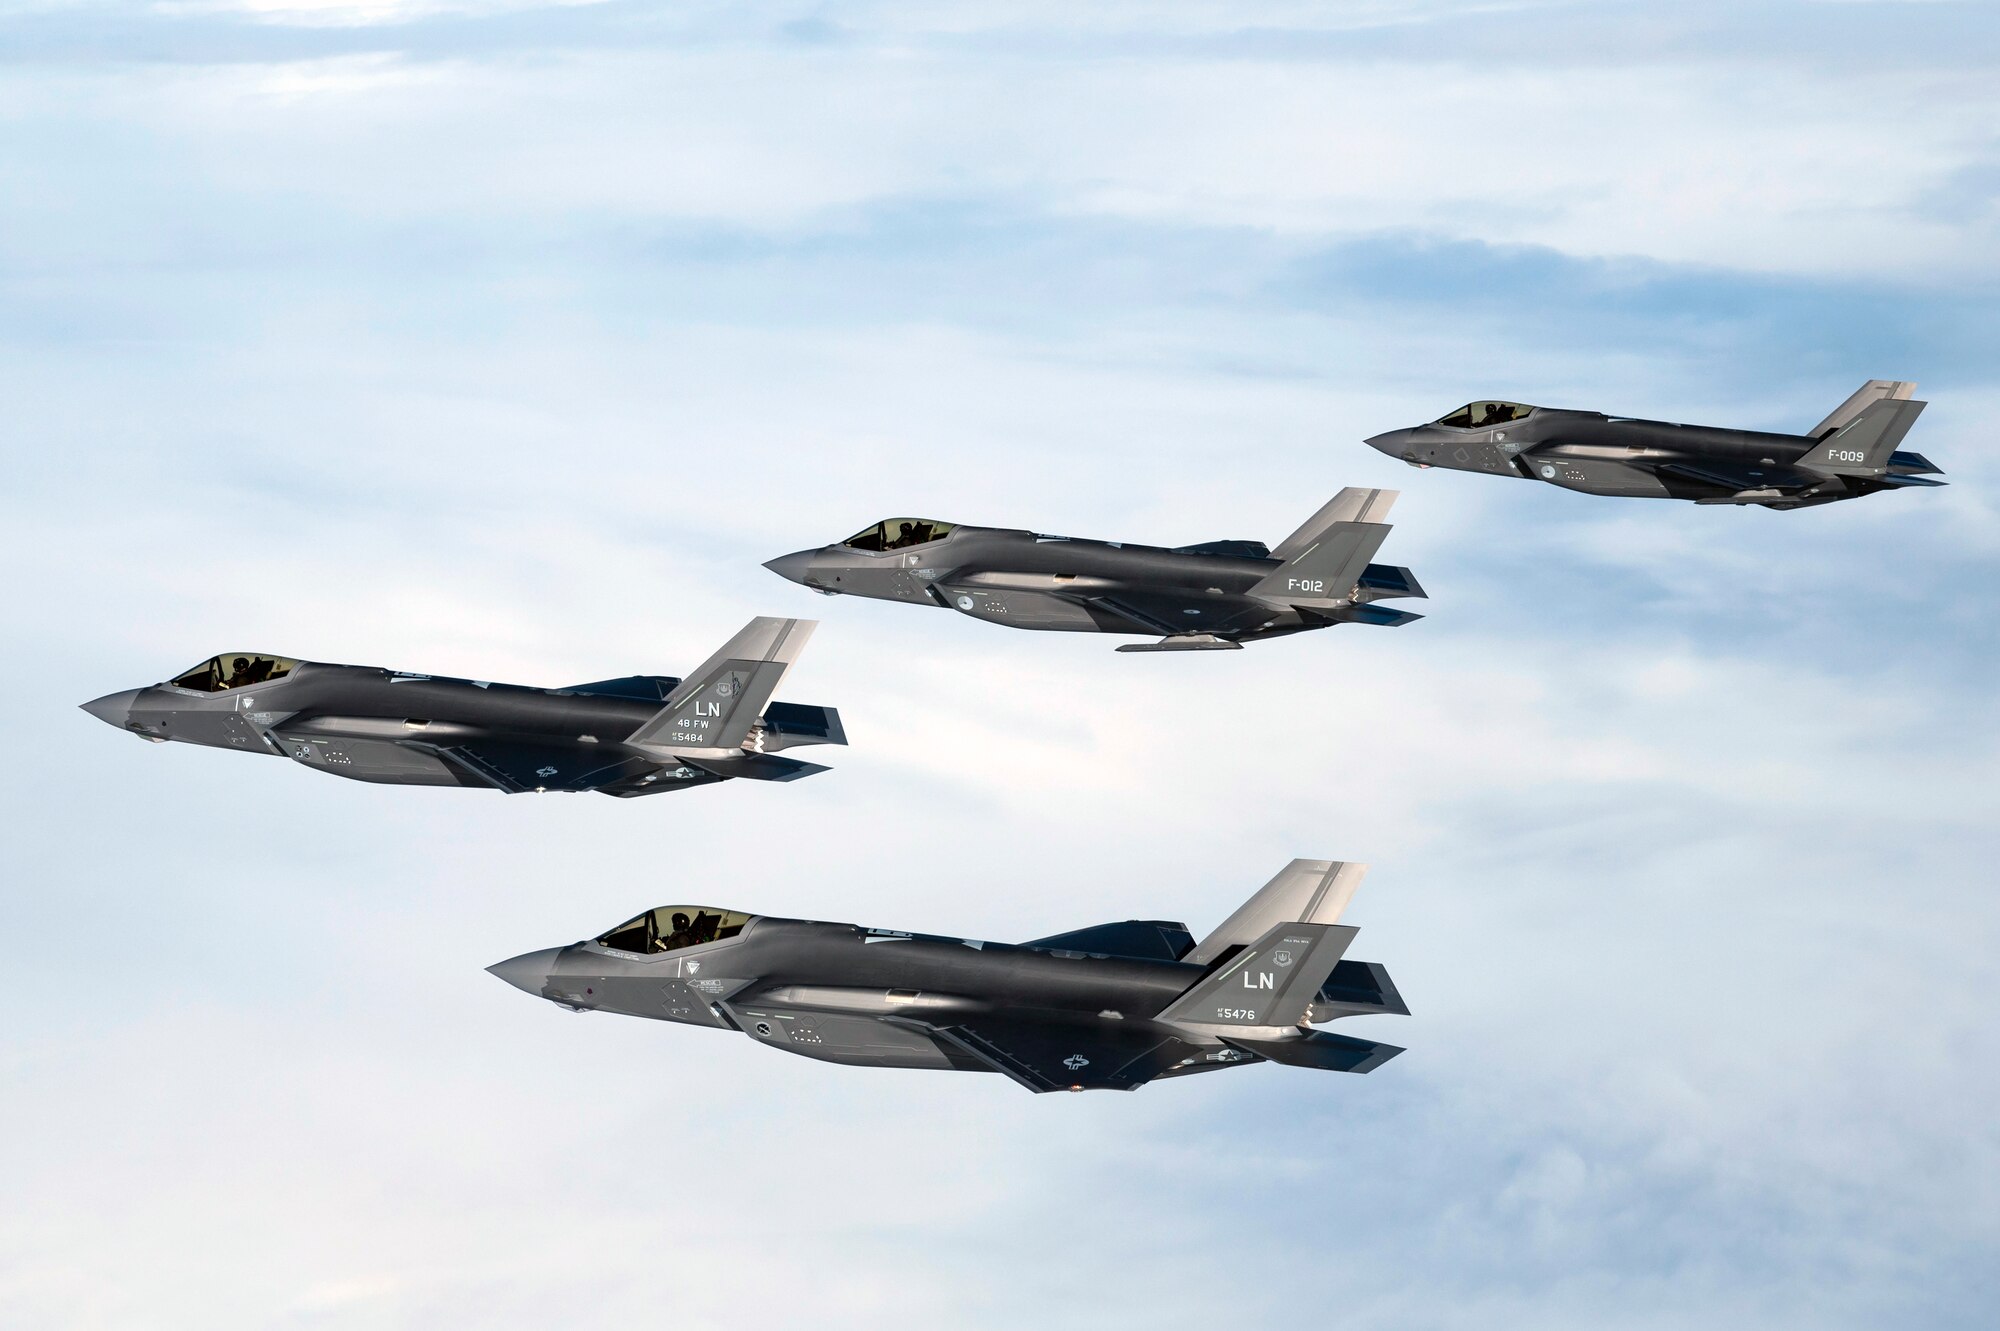 U.S. Air Force and Royal Netherlands Air Force F-35A Lightning II aircraft conduct a bilateral air-to-air training exercise over the Netherlands